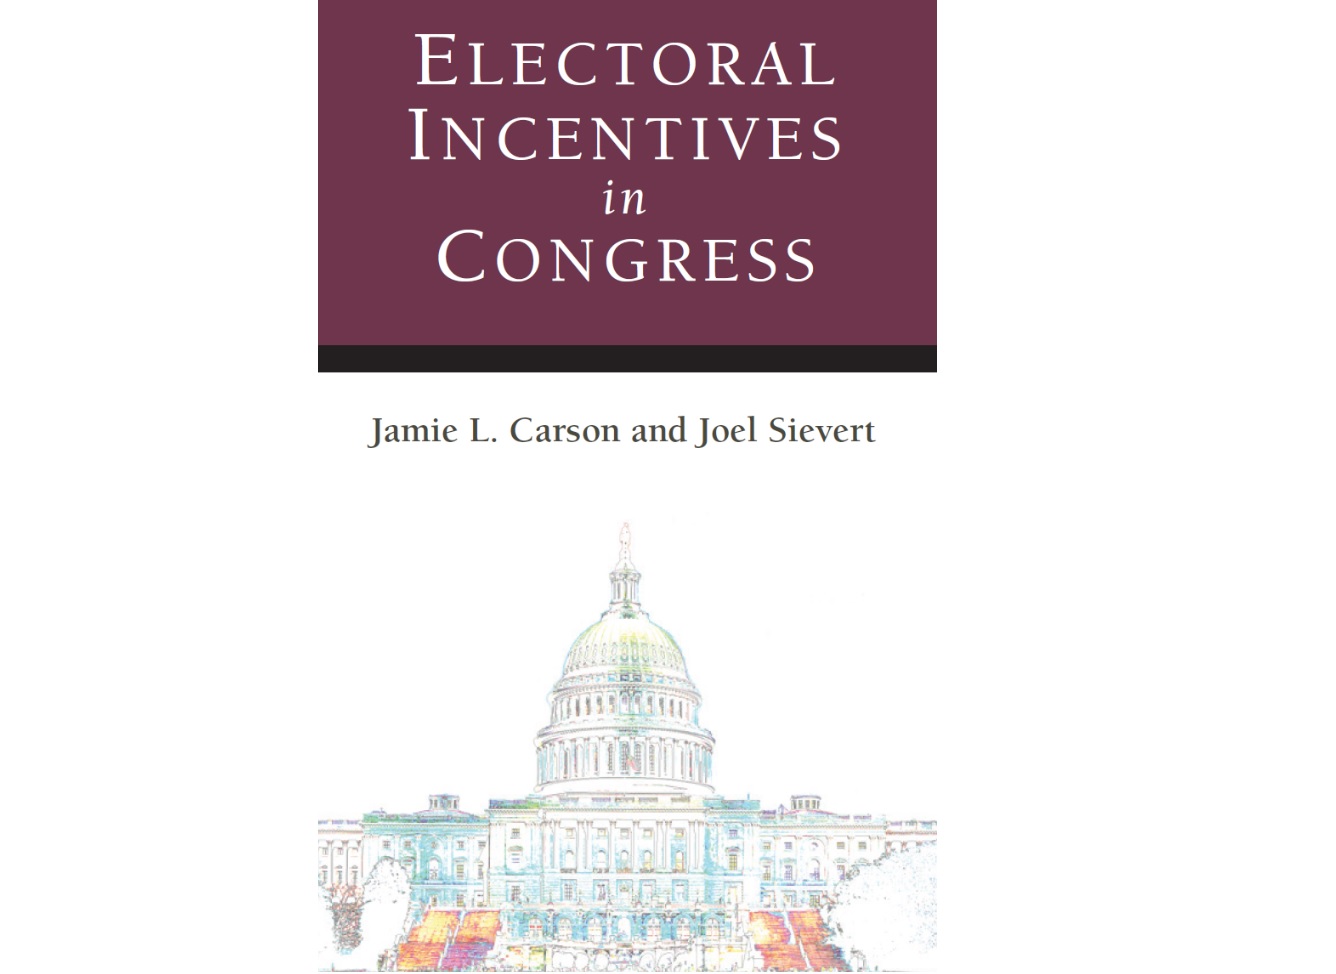 Dr. Joel Sievert New Book Electoral Incentives in Congress.